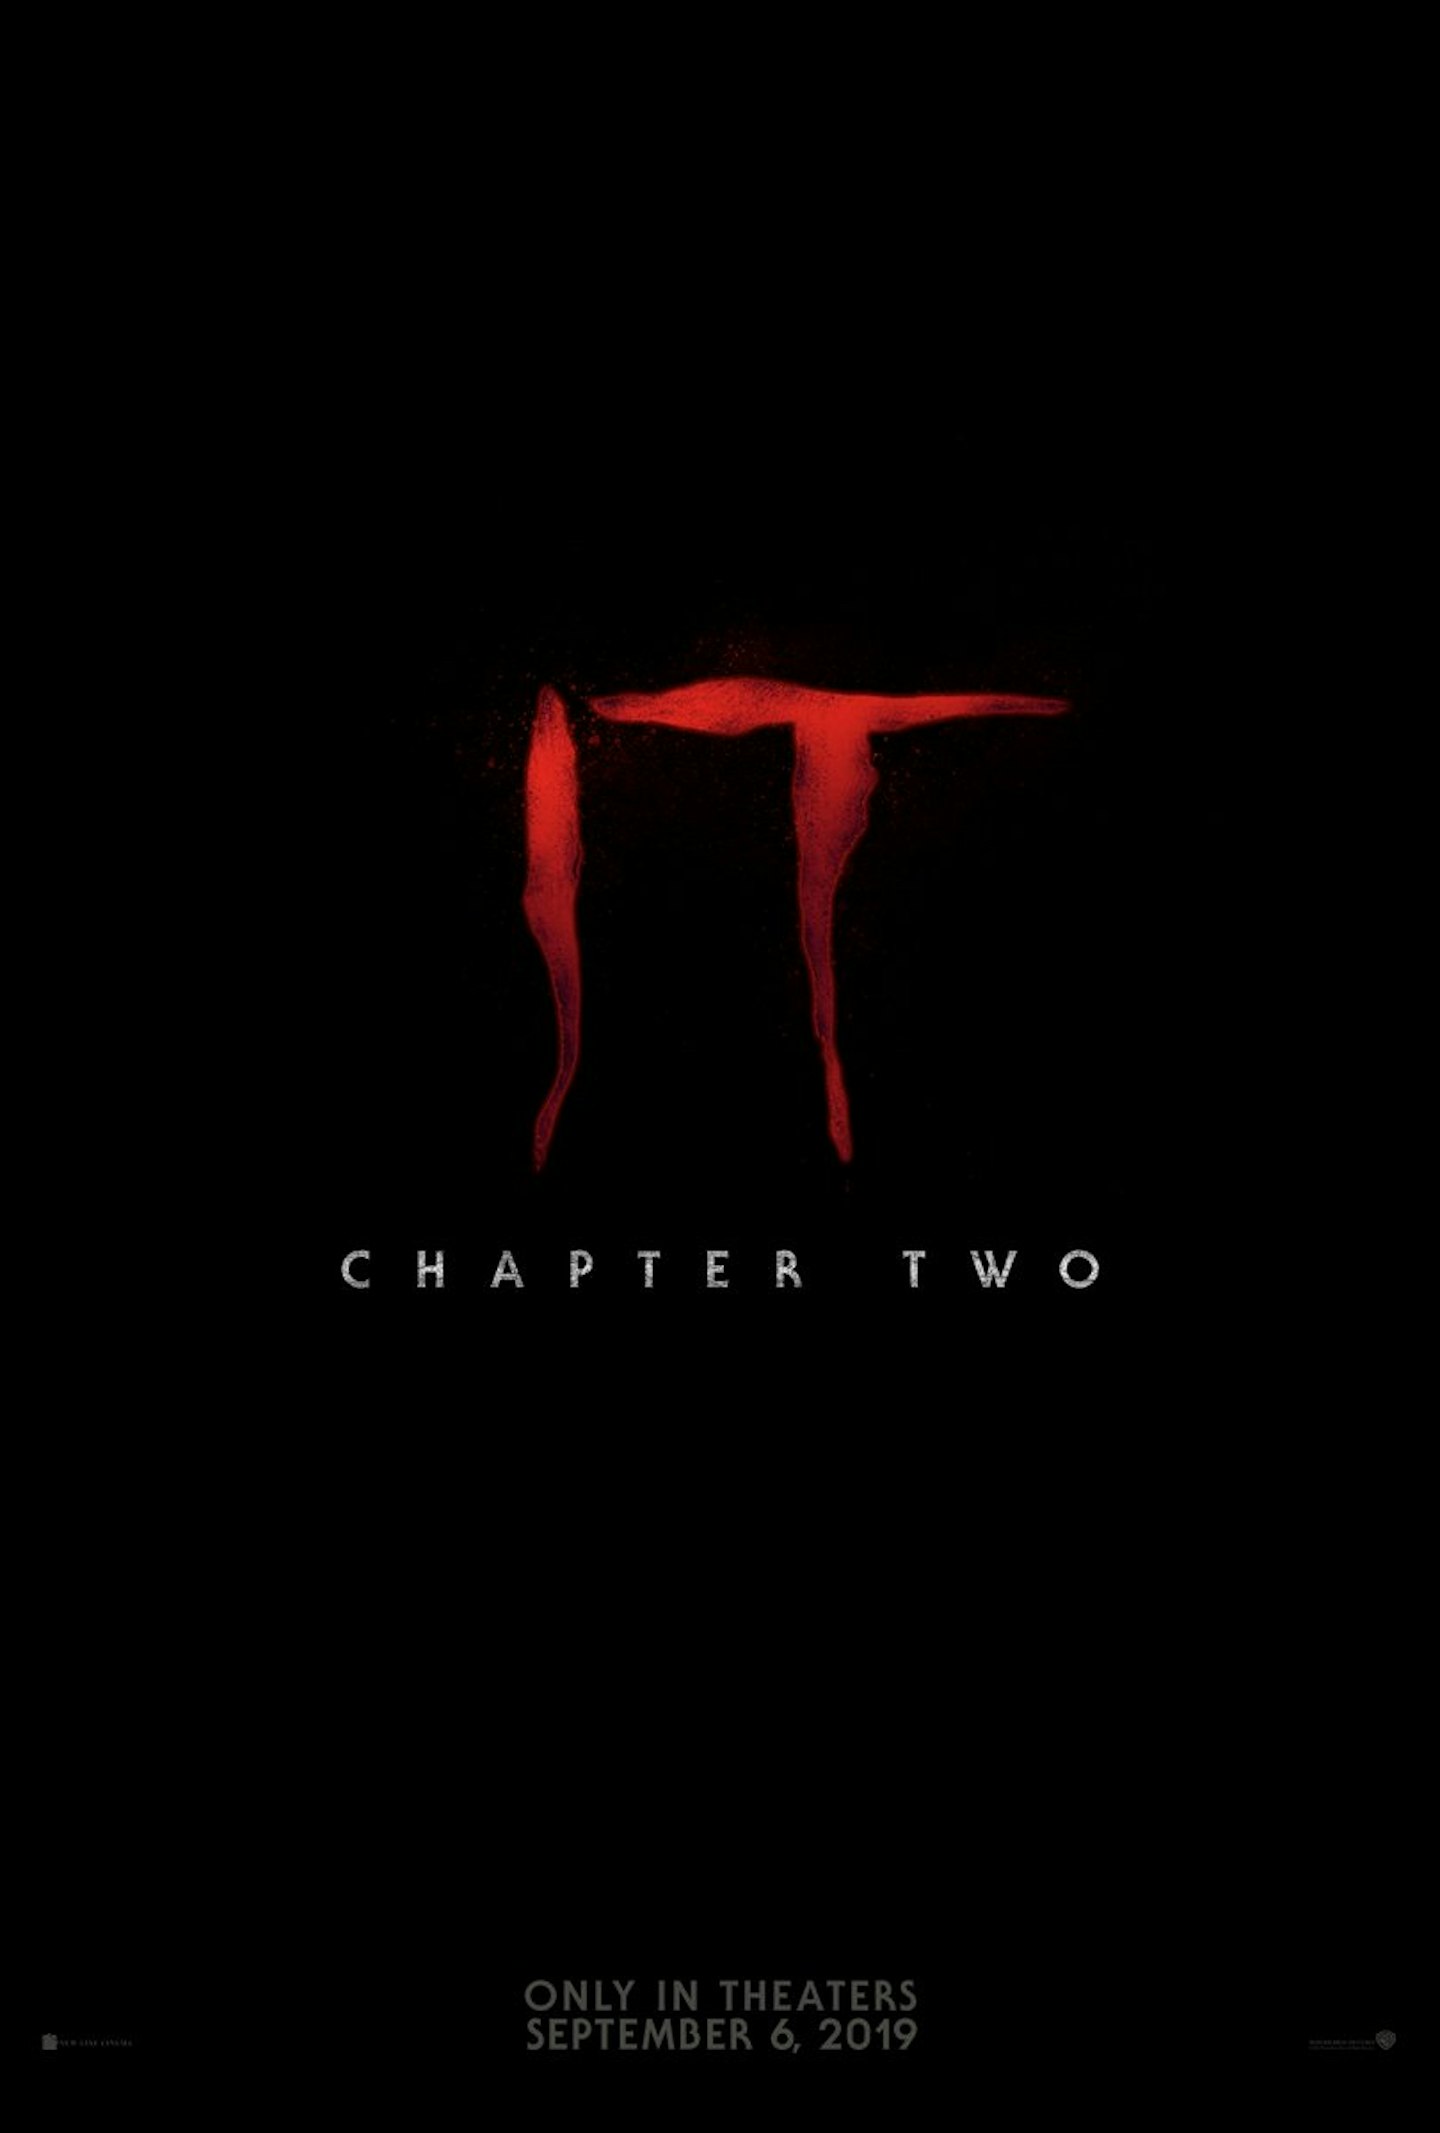 It: Chapter Two teaser poster